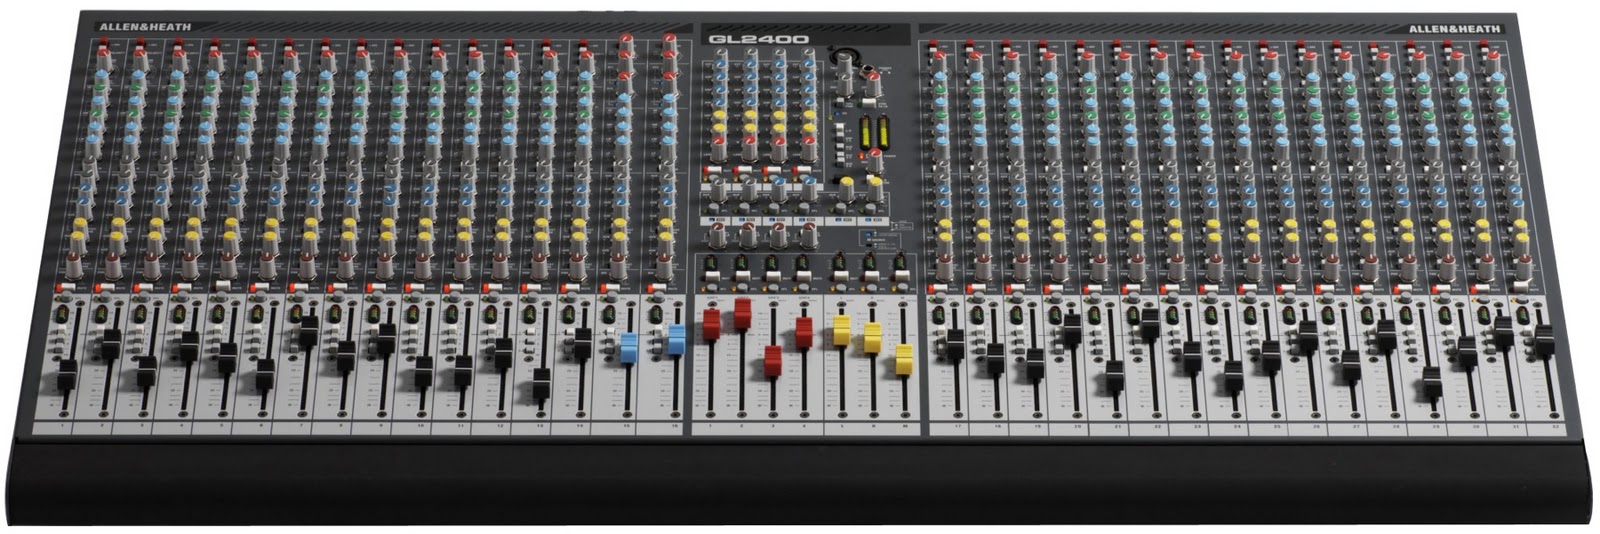 Allen and Heath GL2400 | Audio Gear Review